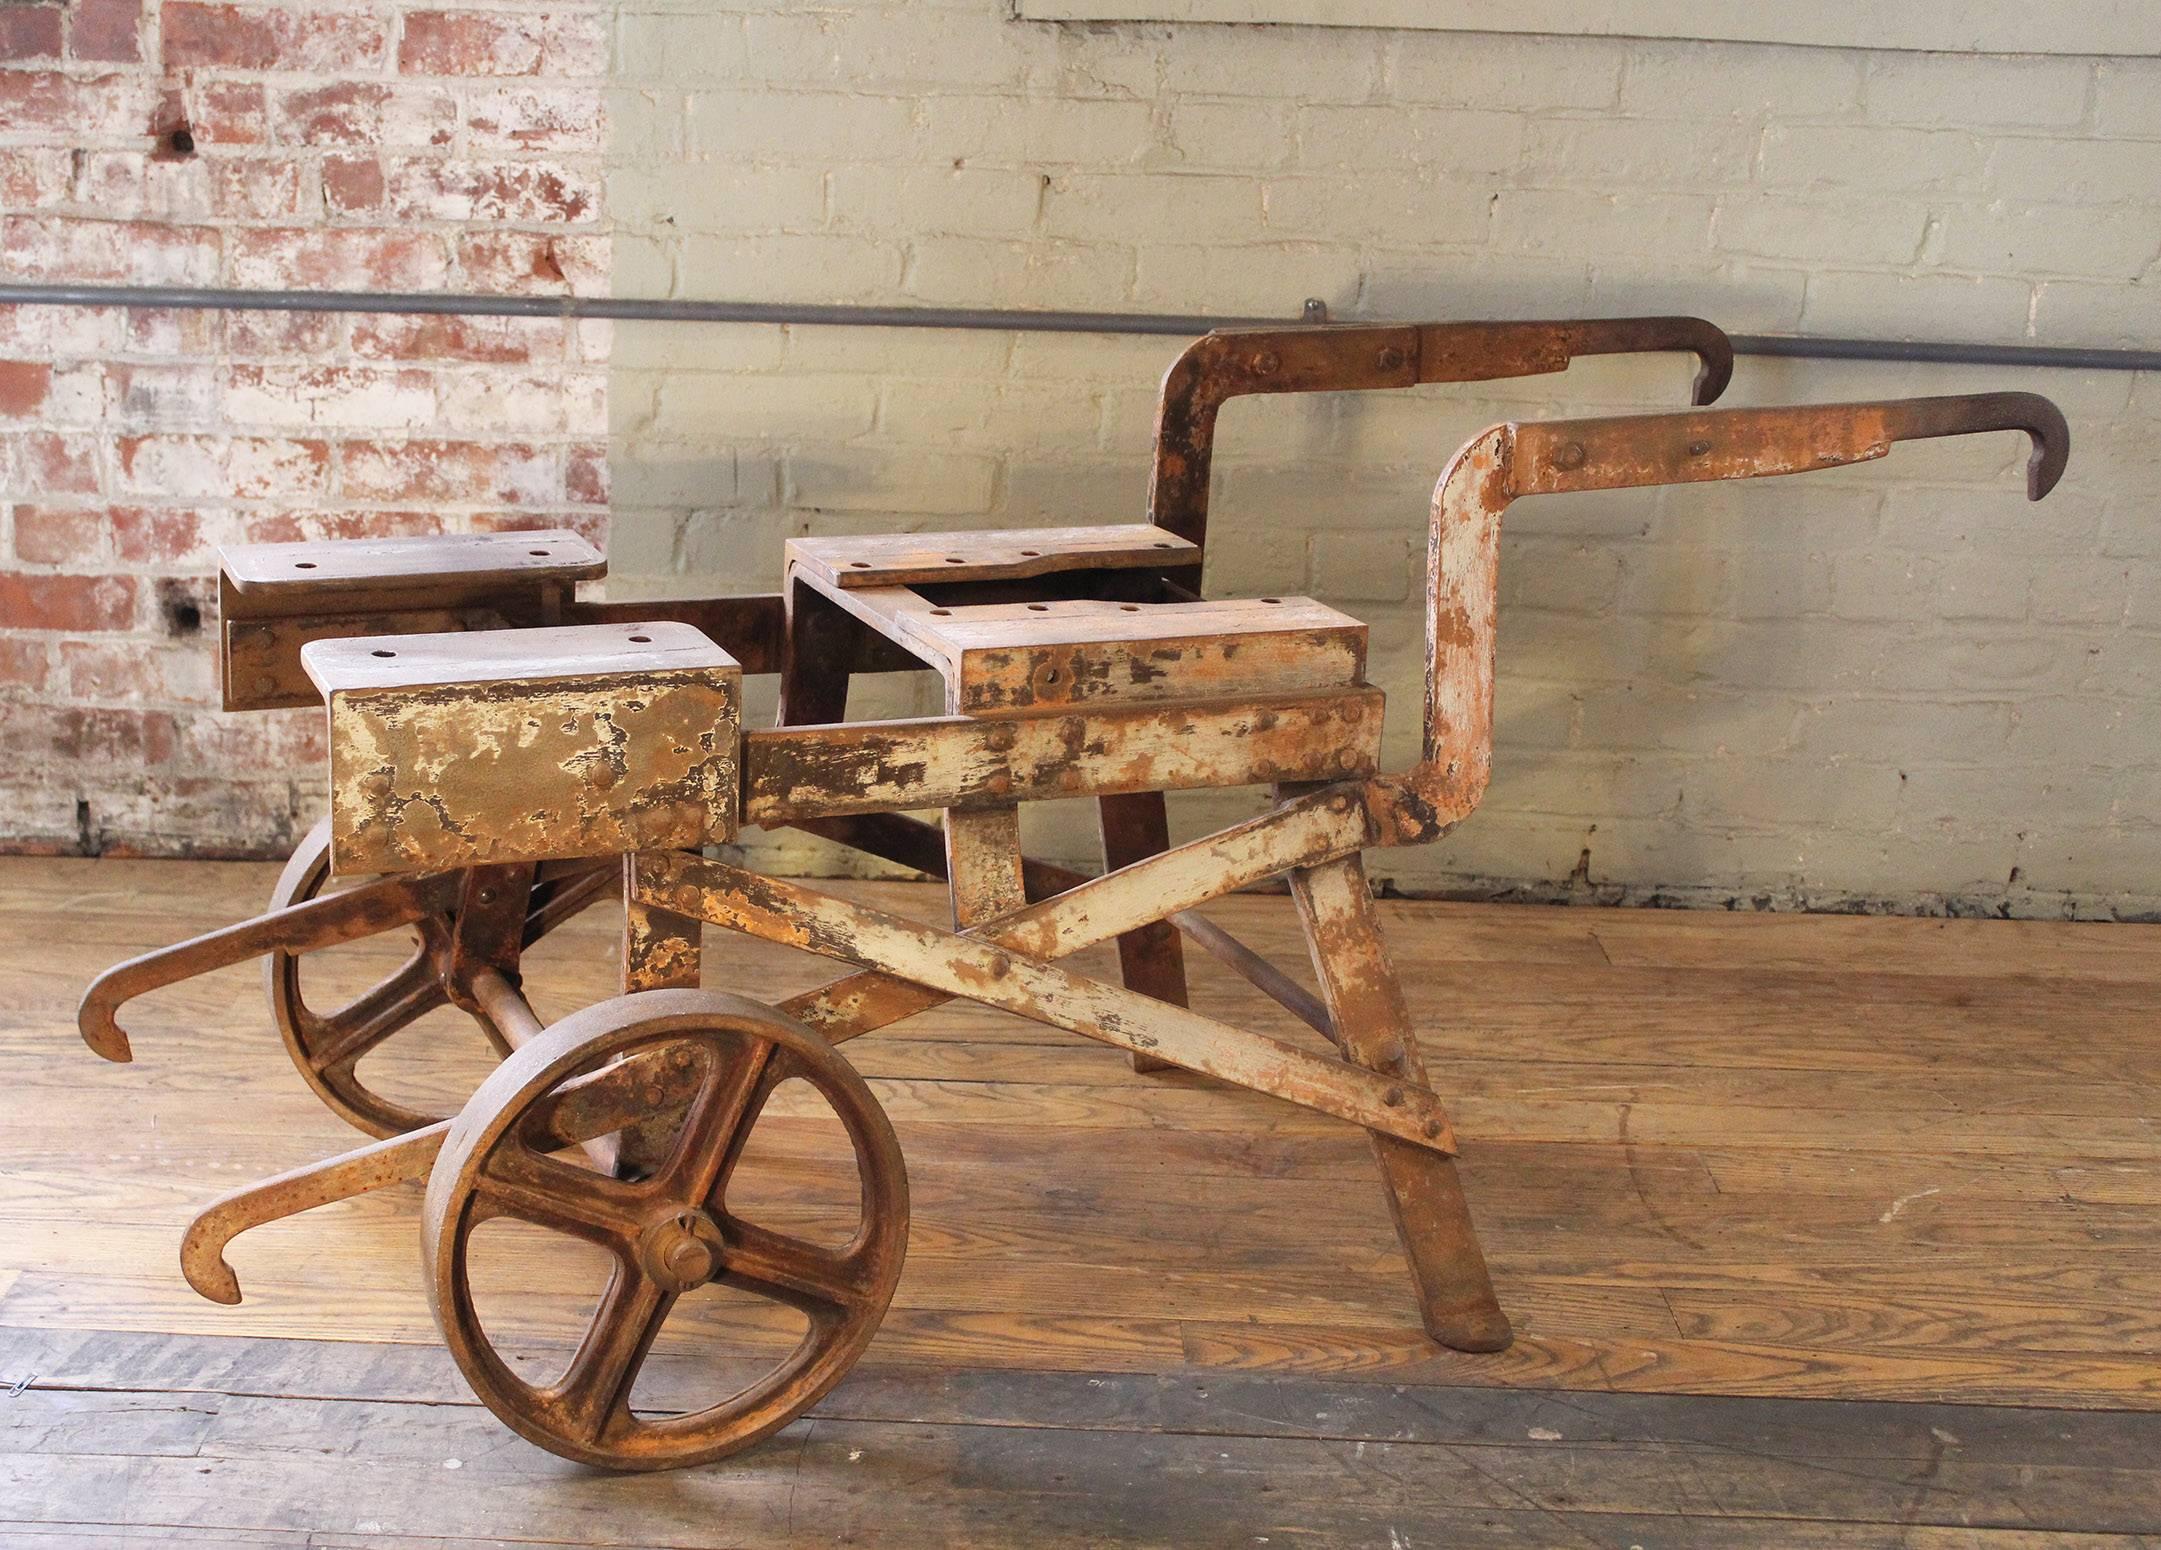 Industrial vintage Outdoor Architectural Object Art factory shop Machine Age steel and metal rolling bar cart, table, farm style wheelbarrow. Overall dimensions are 55 1/2" x 25 1/2" x 25 1/4". Top measures 15 3/4" x 28